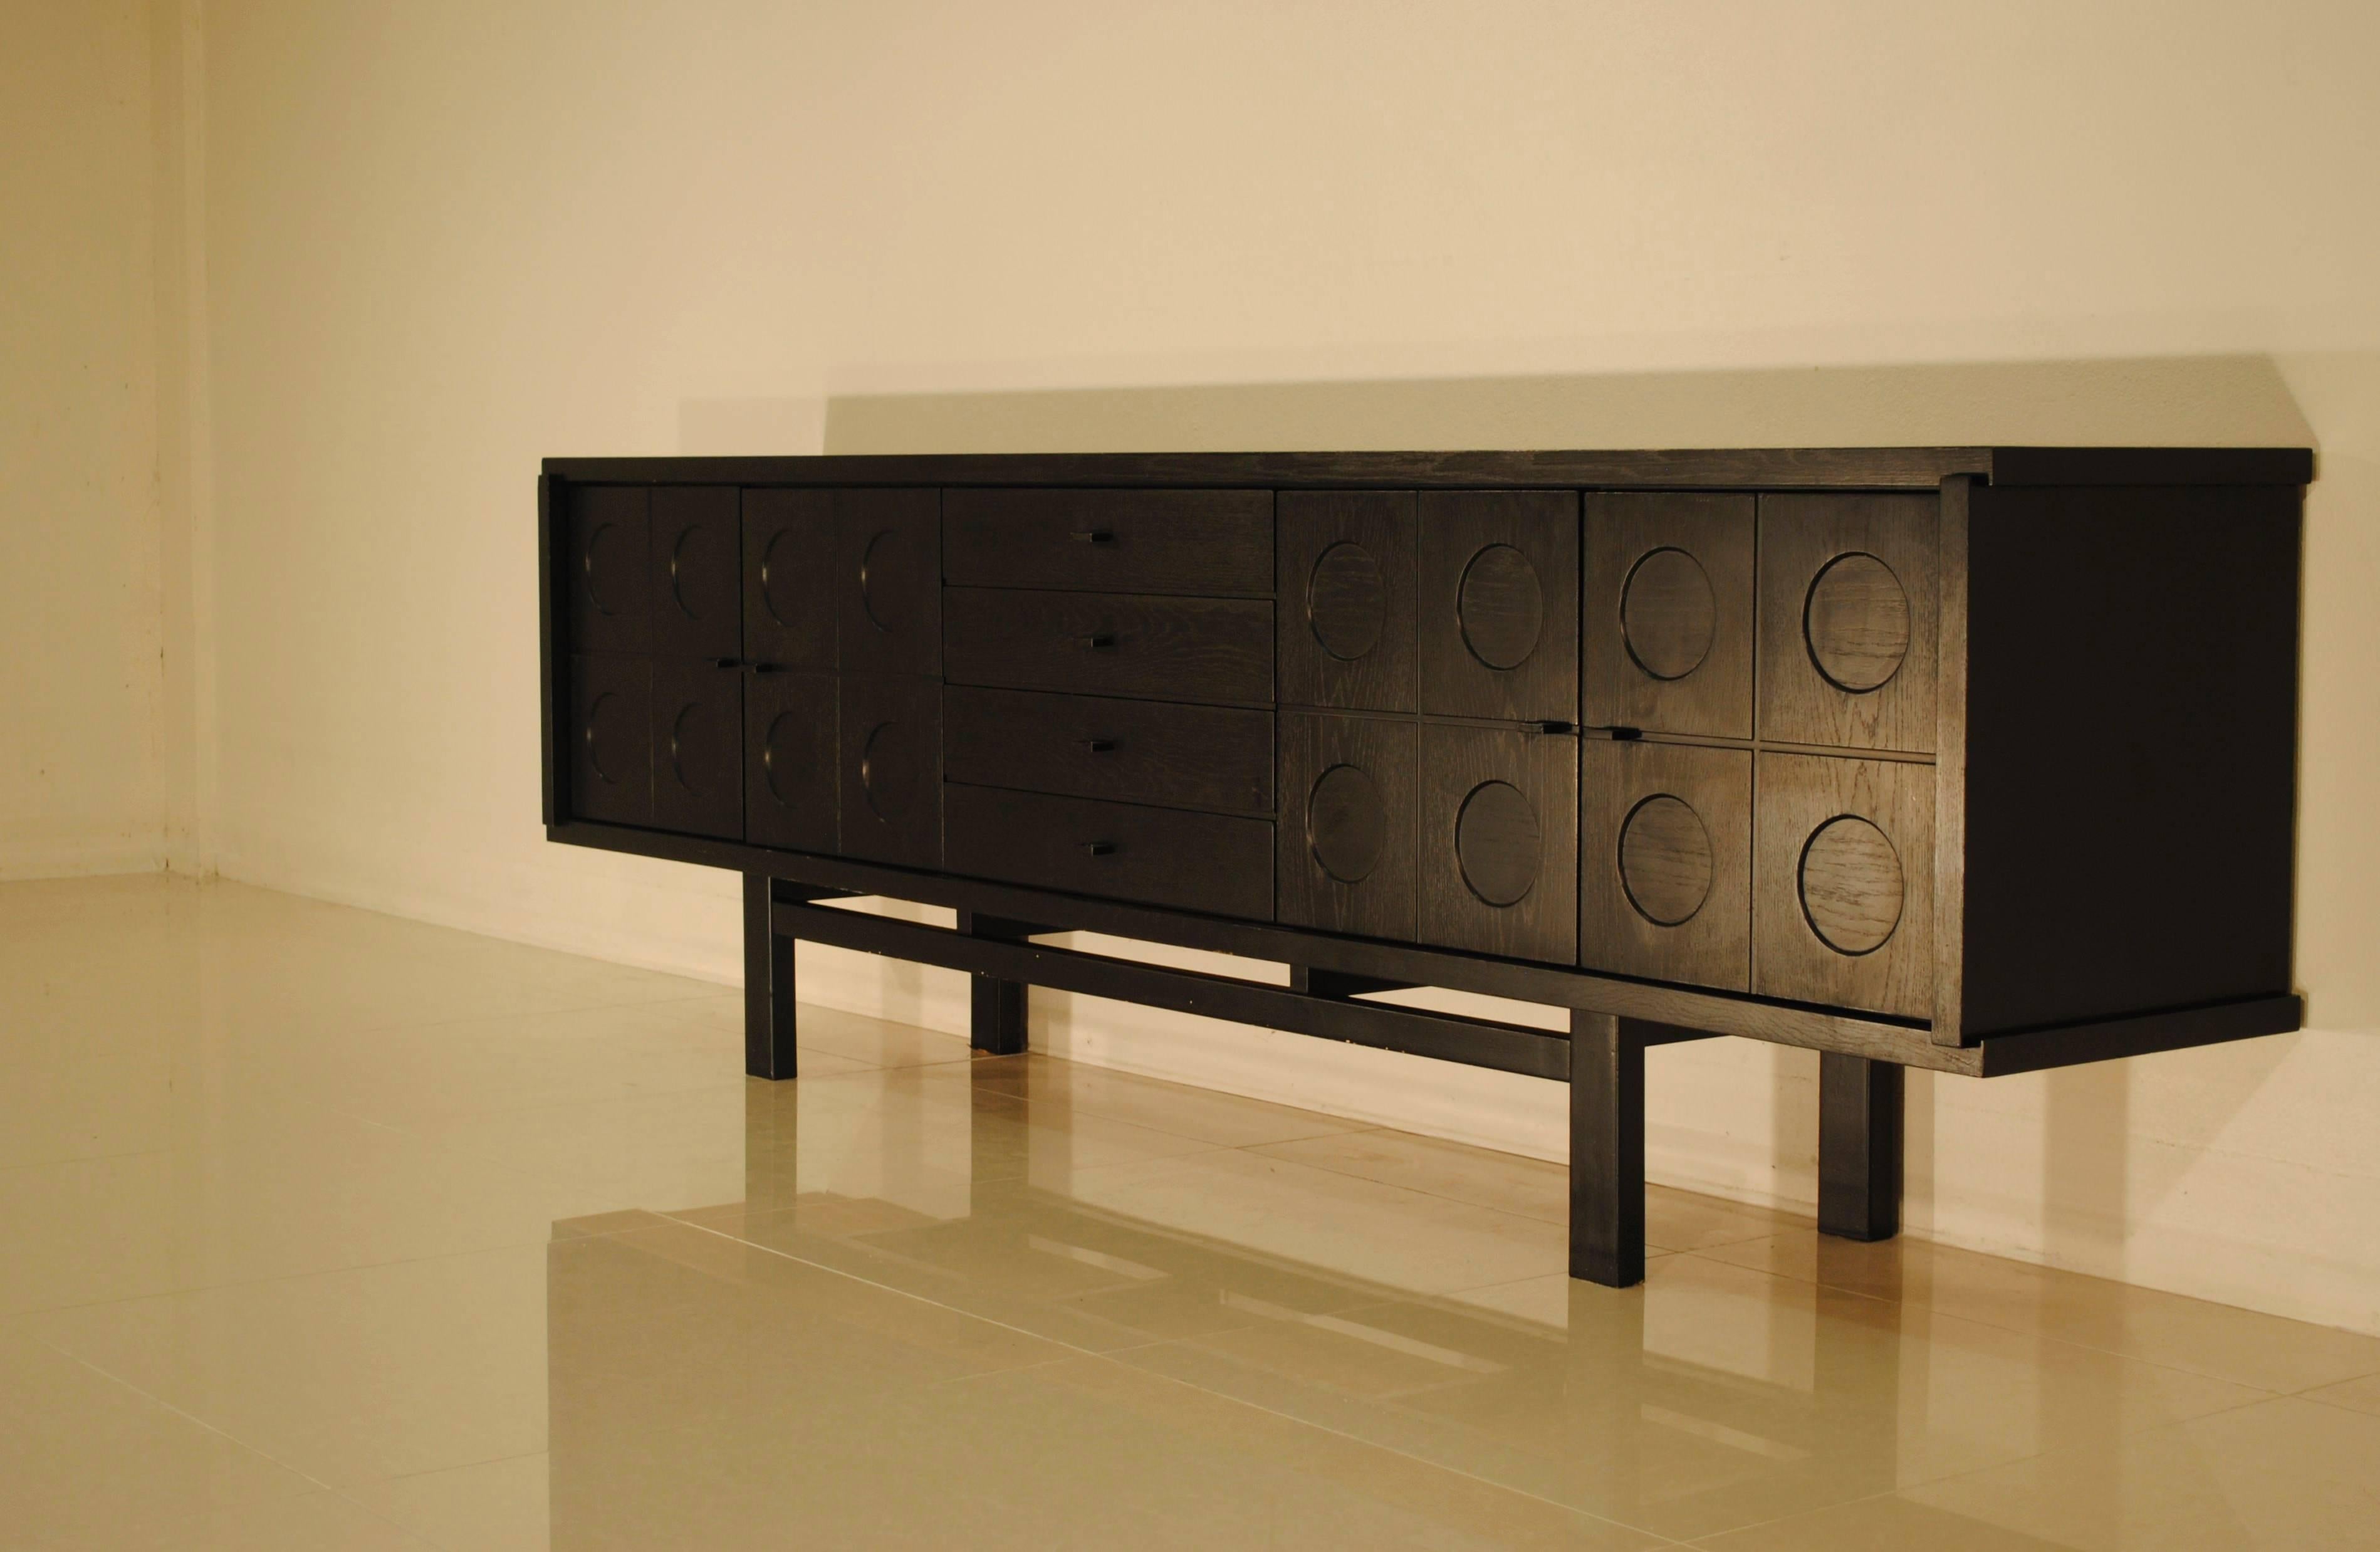 Another nice example of the highly sought after Belgian Brutalist furniture fabrication of the end of the 1970s.
Black ebonized oak and oak veneer. The credenza is in extremely good condition and it's sleek nearly neoclassical design matches almost